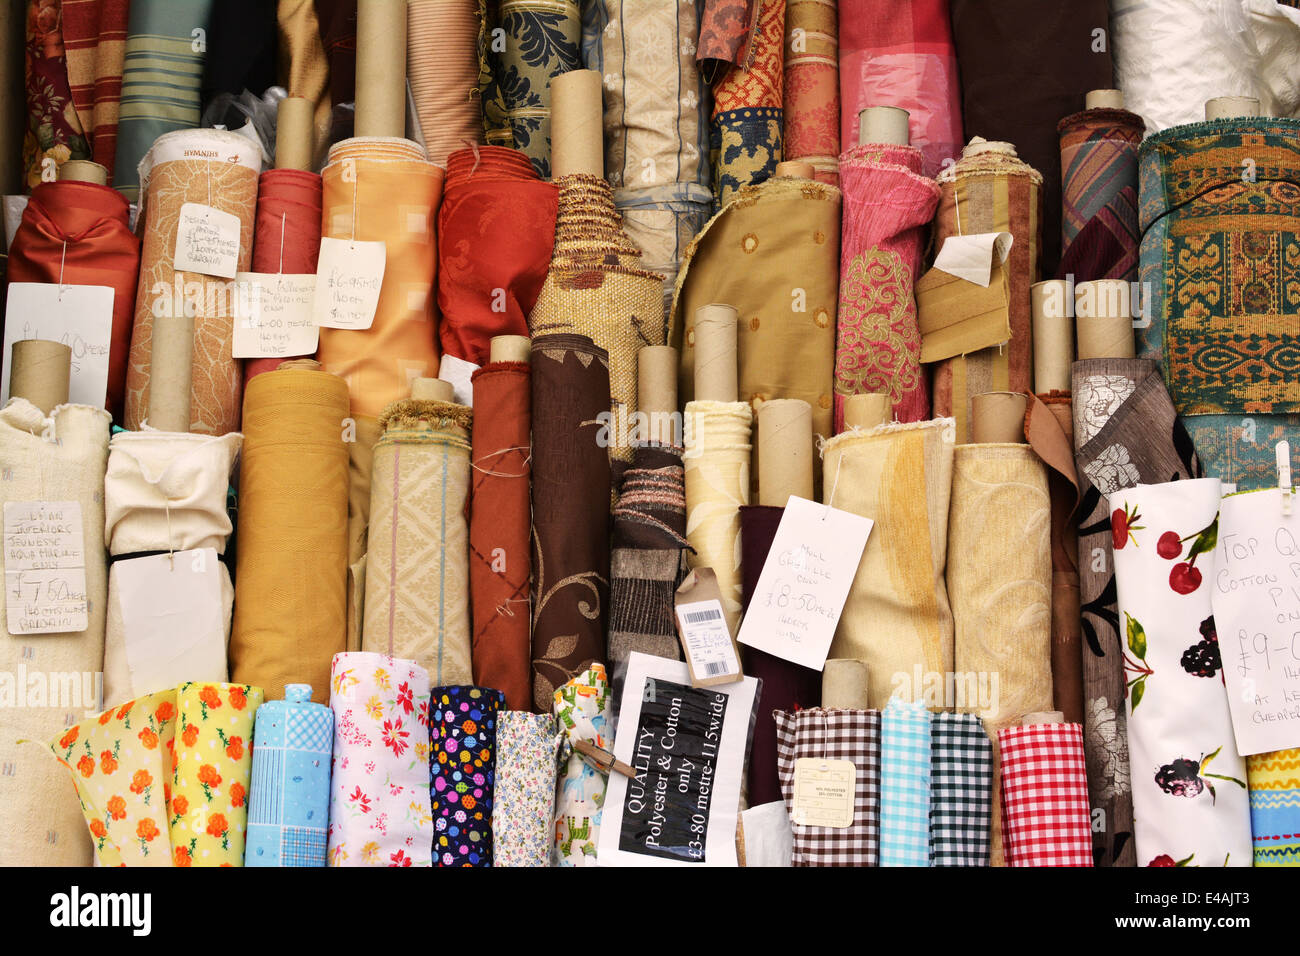 Textile market stall in Norwich, England Stock Photo